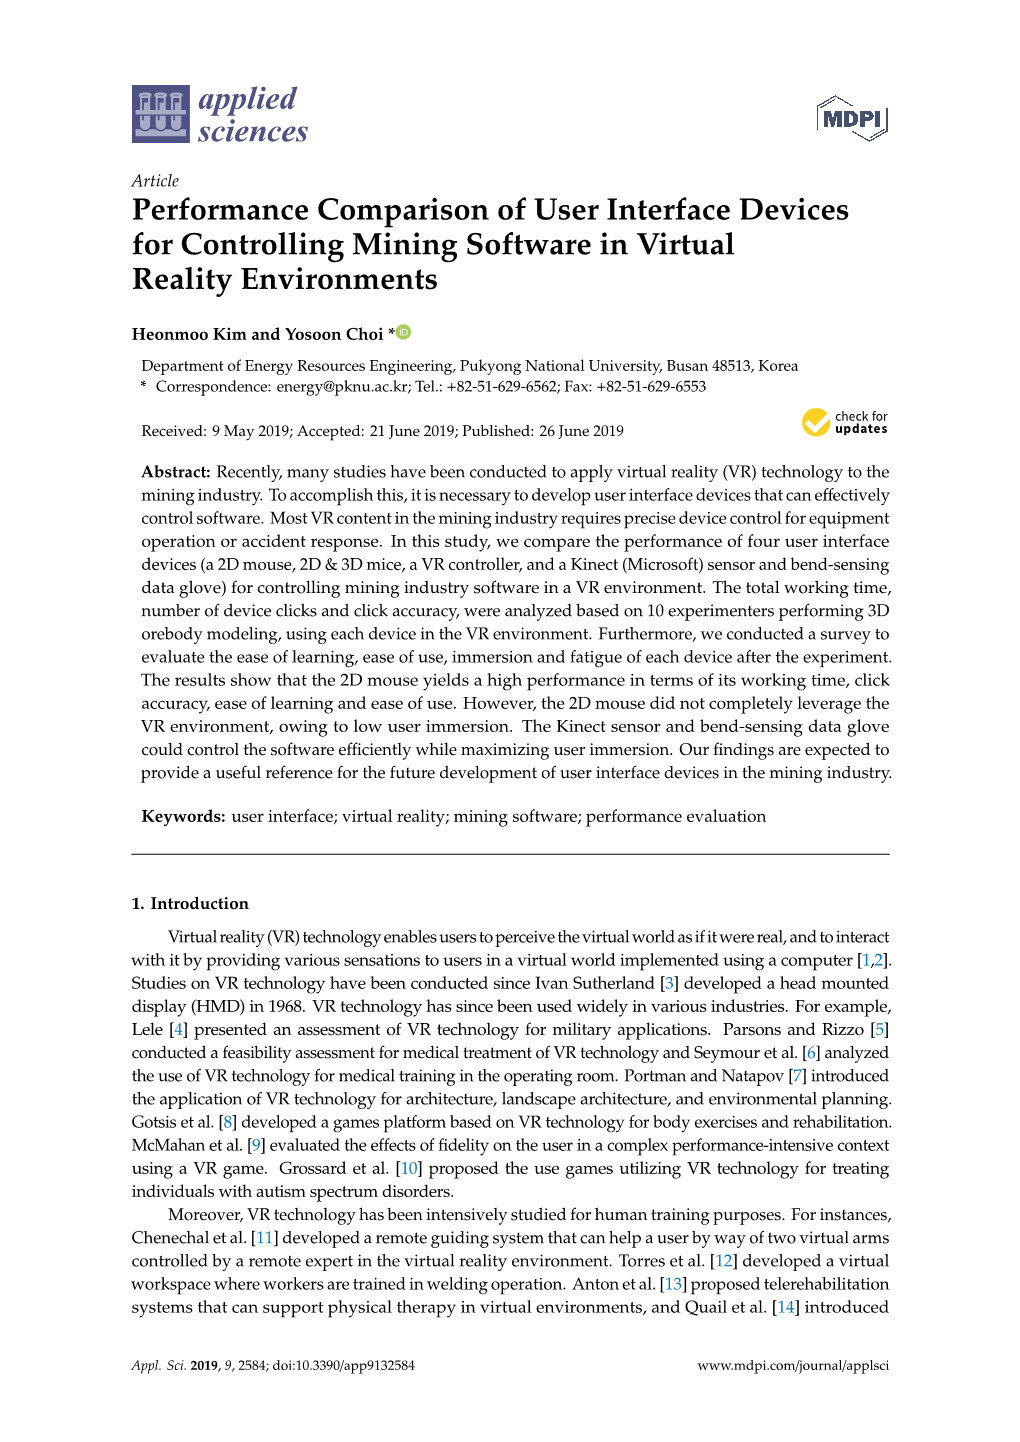 Performance Comparison of User Interface Devices for Controlling Mining Software in Virtual Reality Environments